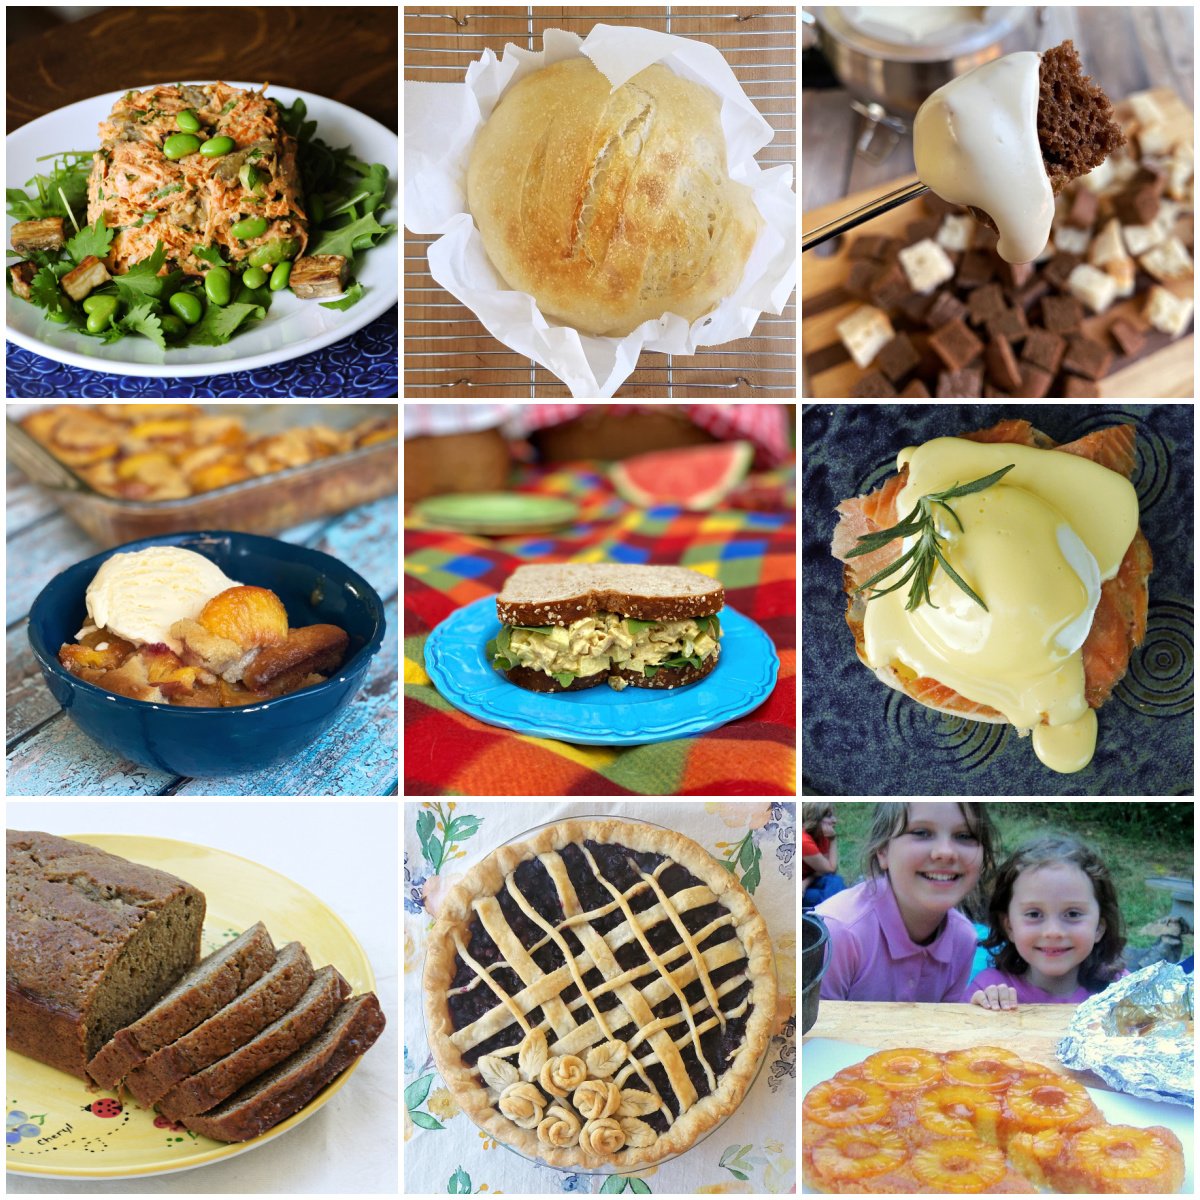 9-panel collage showing images of food and recipes from April Food Holidays calendar.